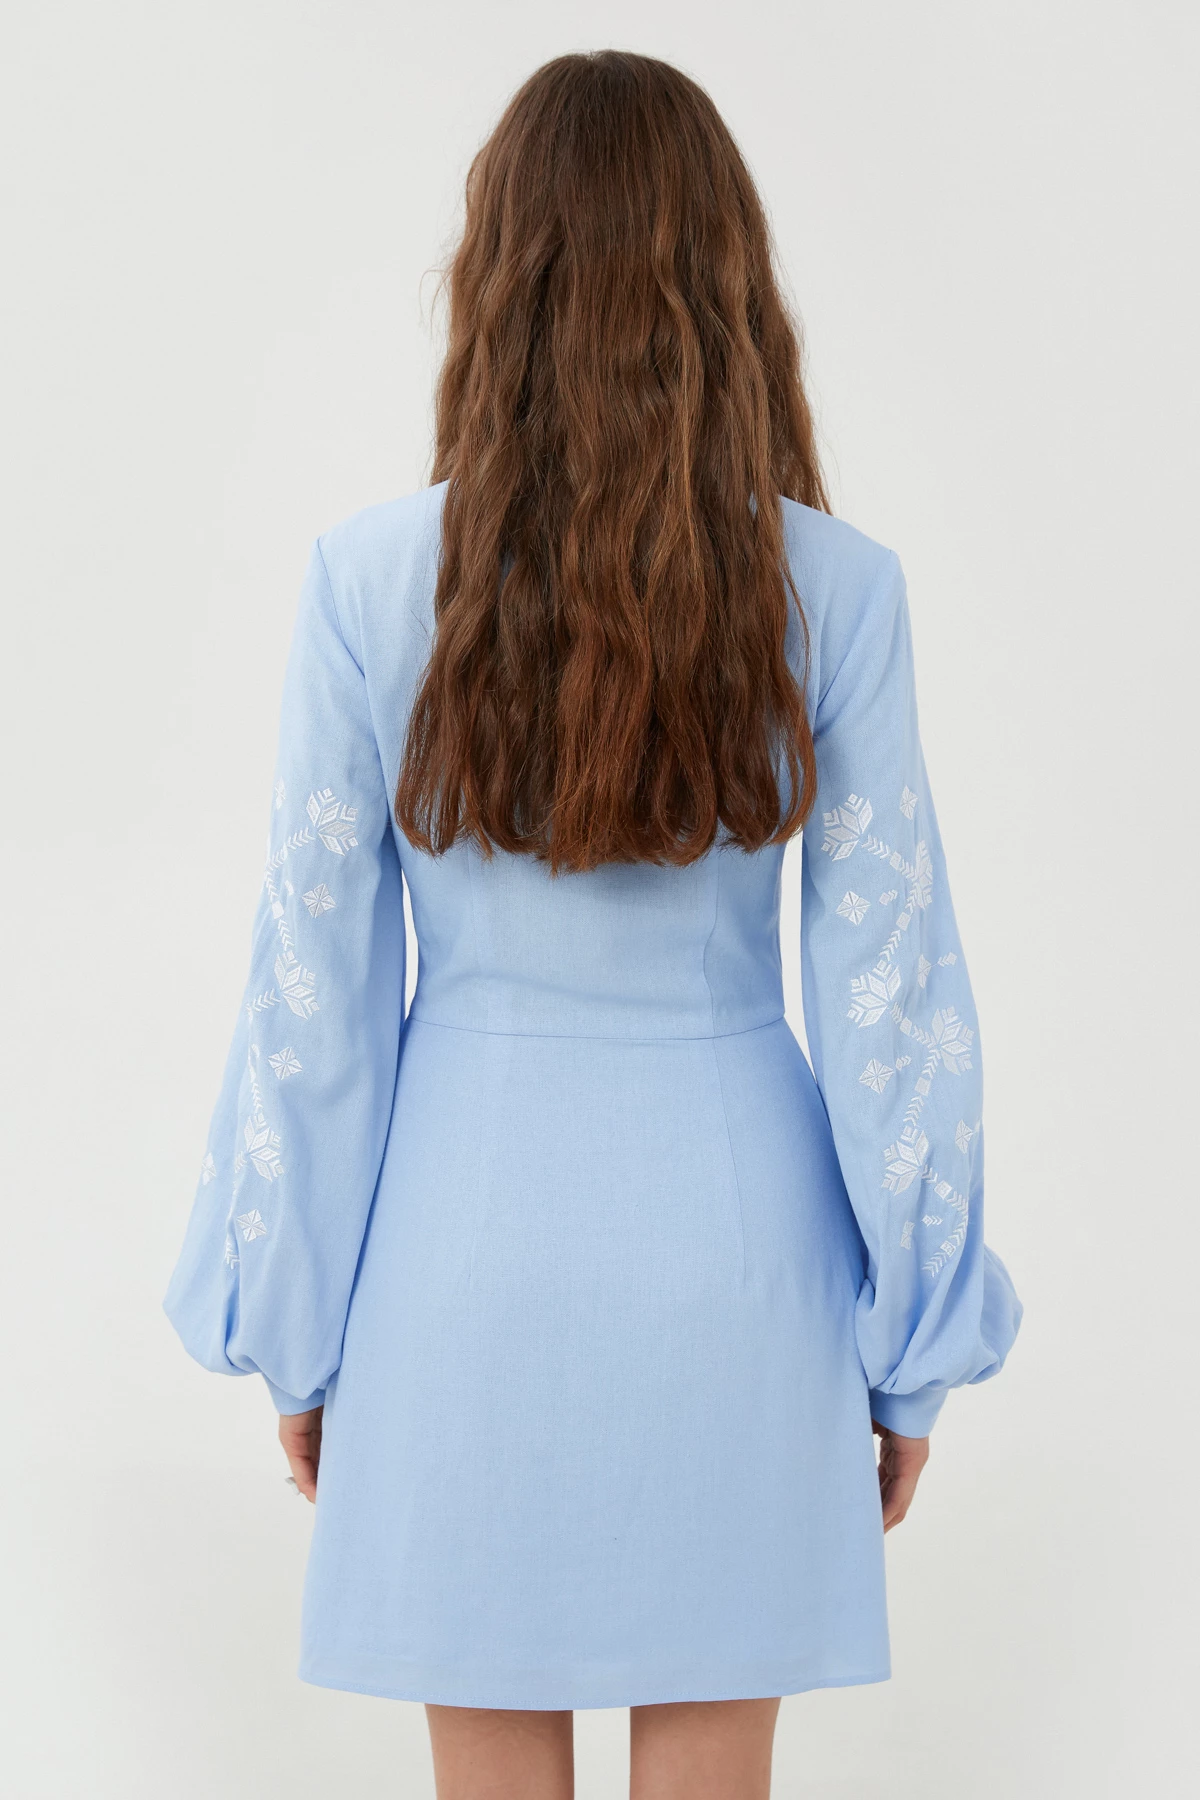 Embroidered short dress "Barvinok" with blue linen, photo 5